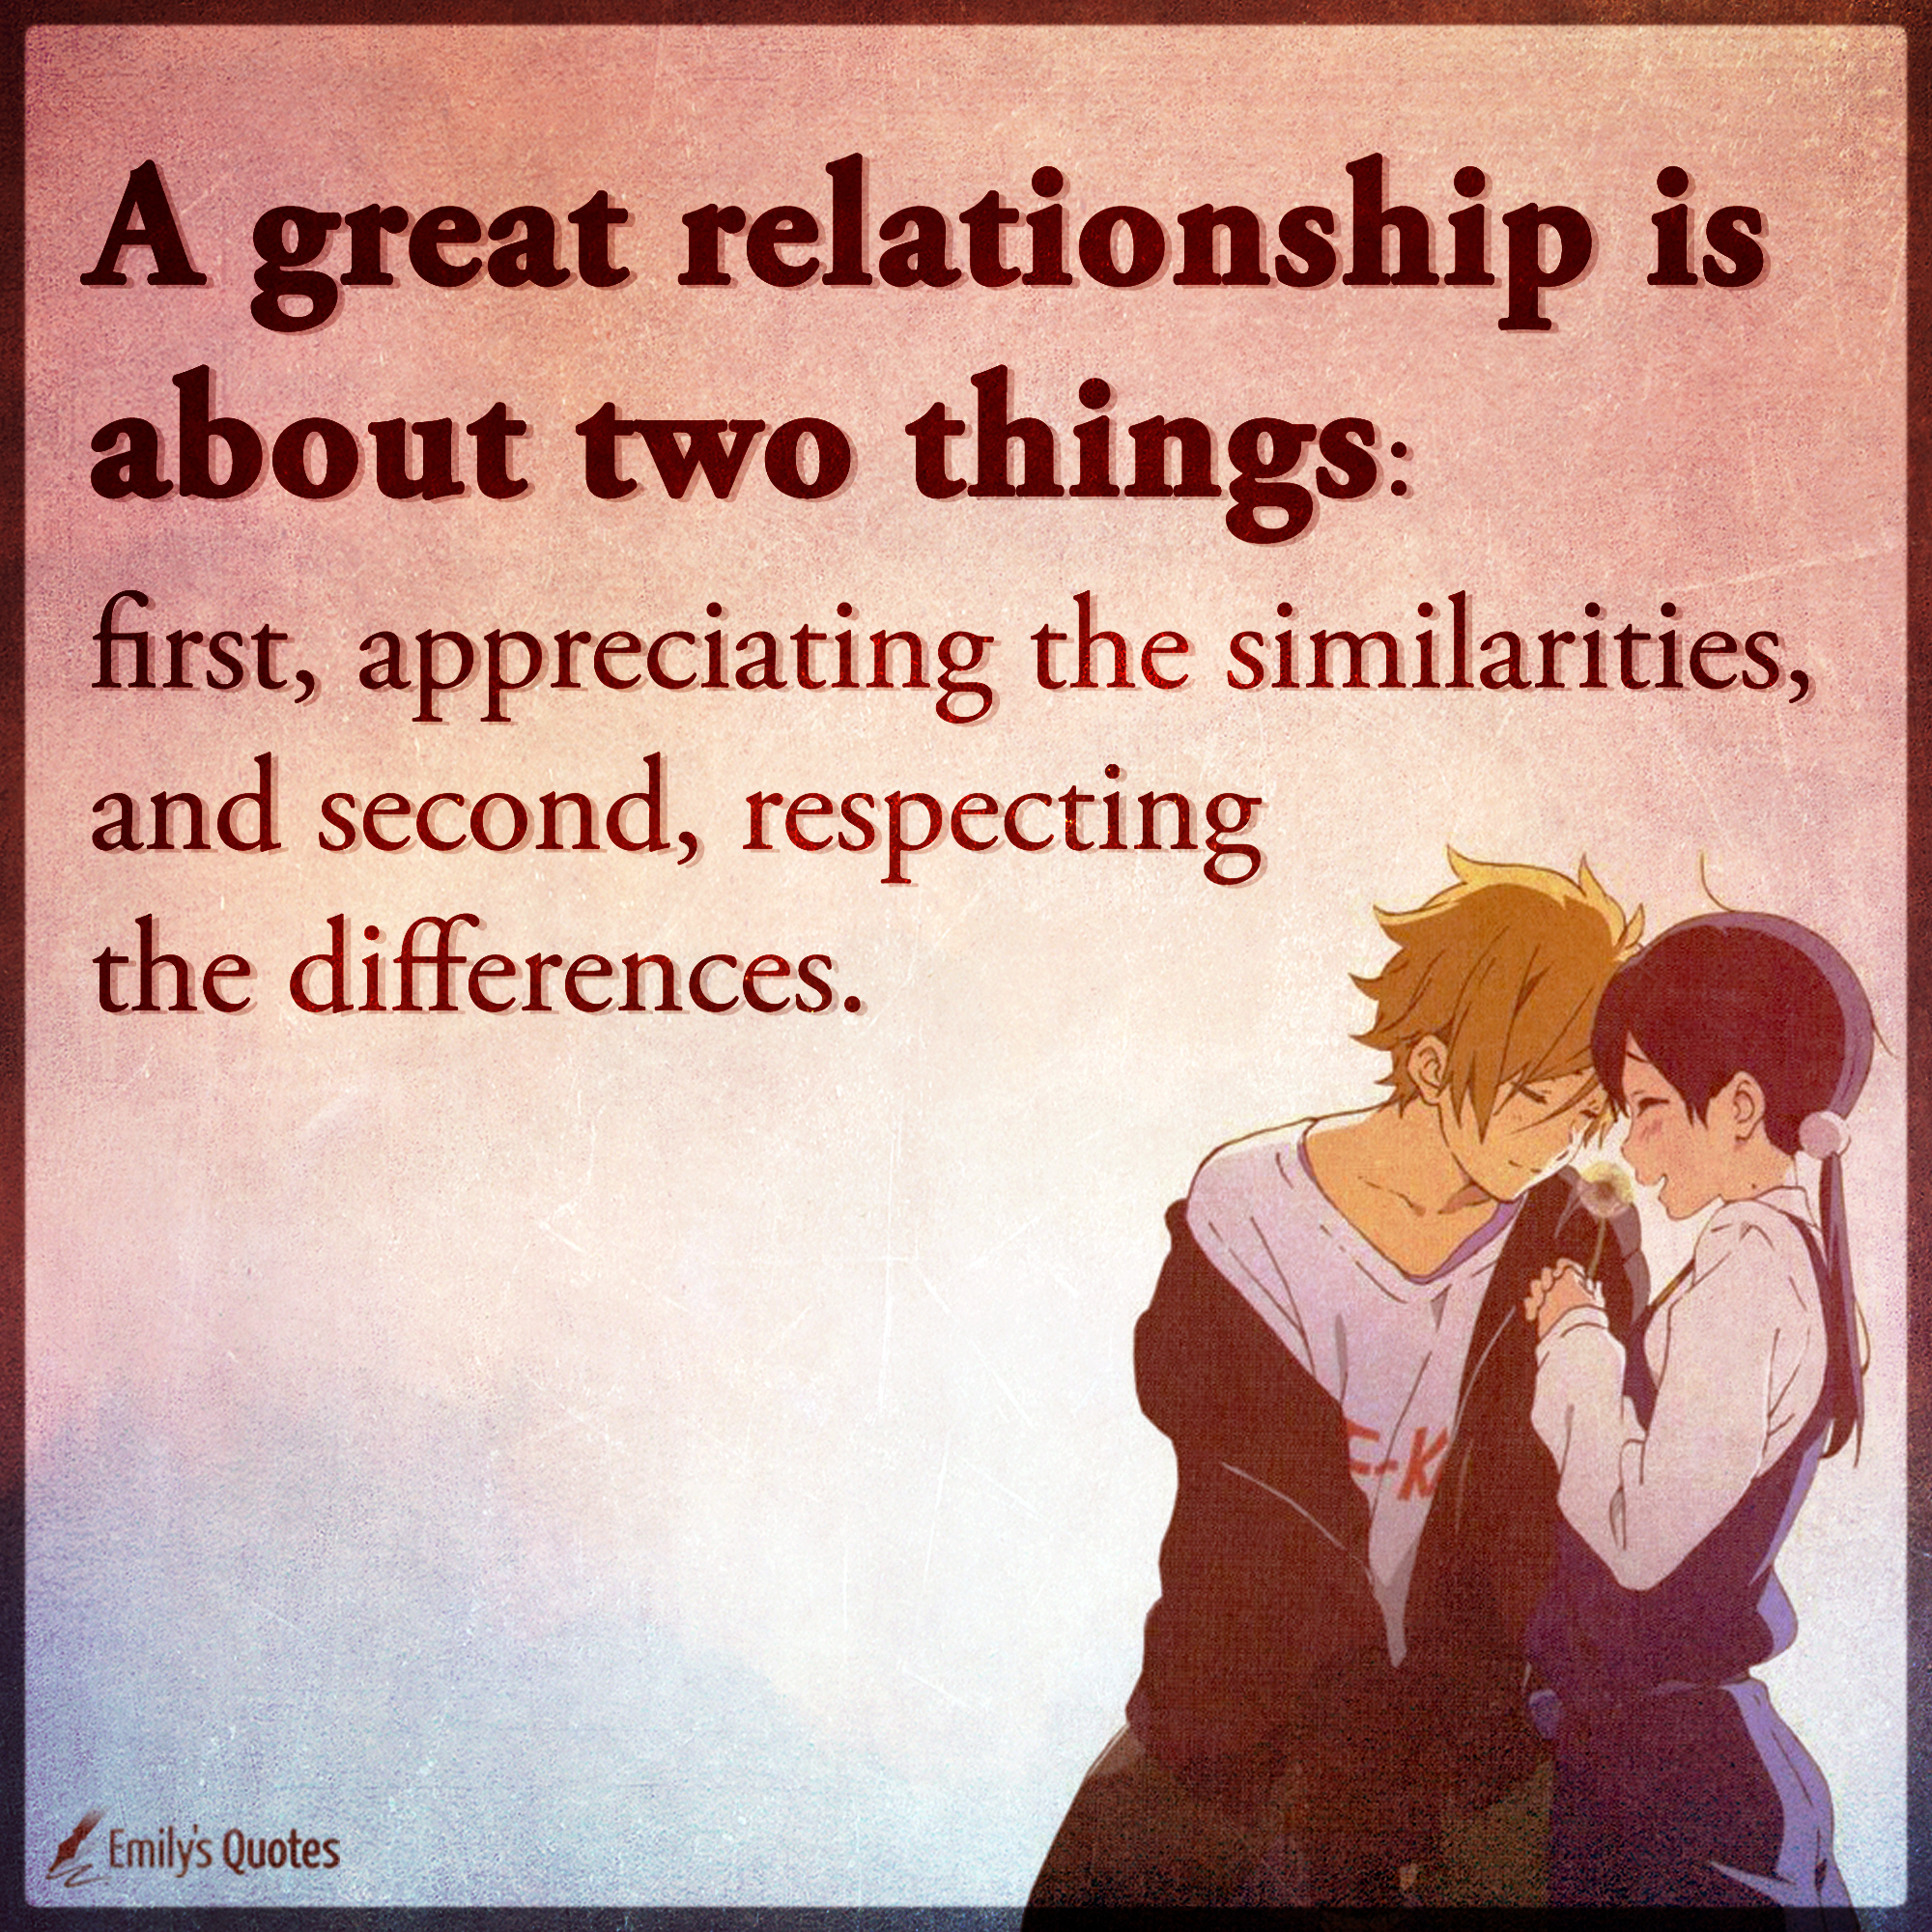 A great relationship is about two things: first, appreciating